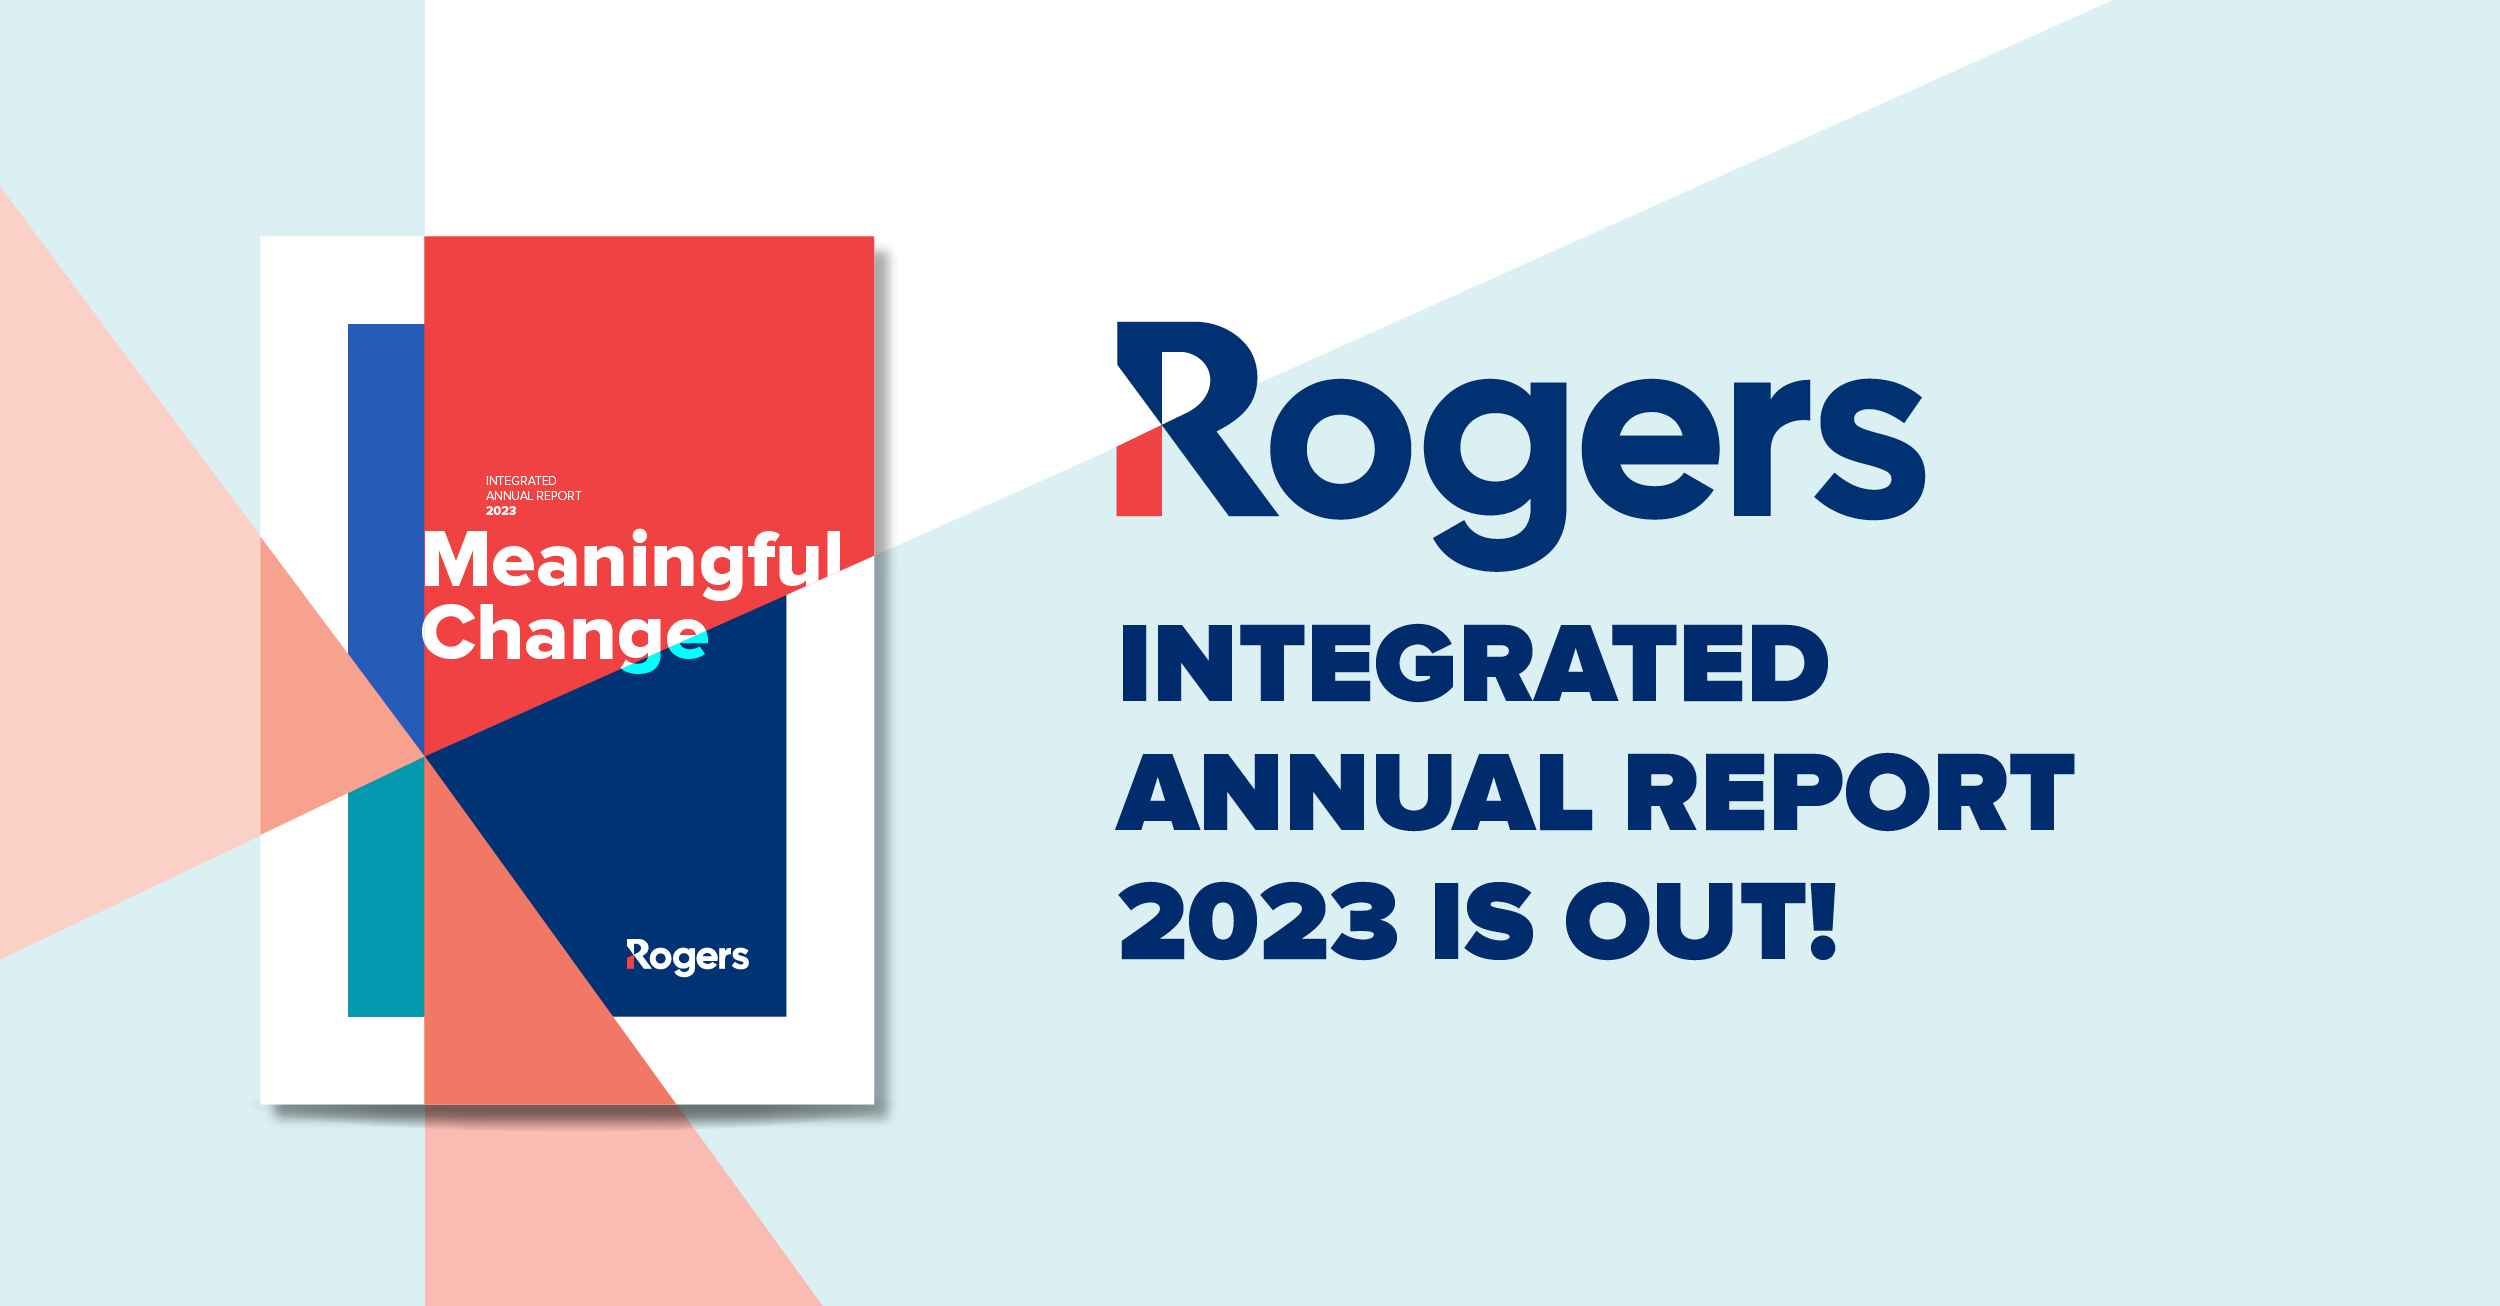 Rogers Integrated Annual Report 2023 is out